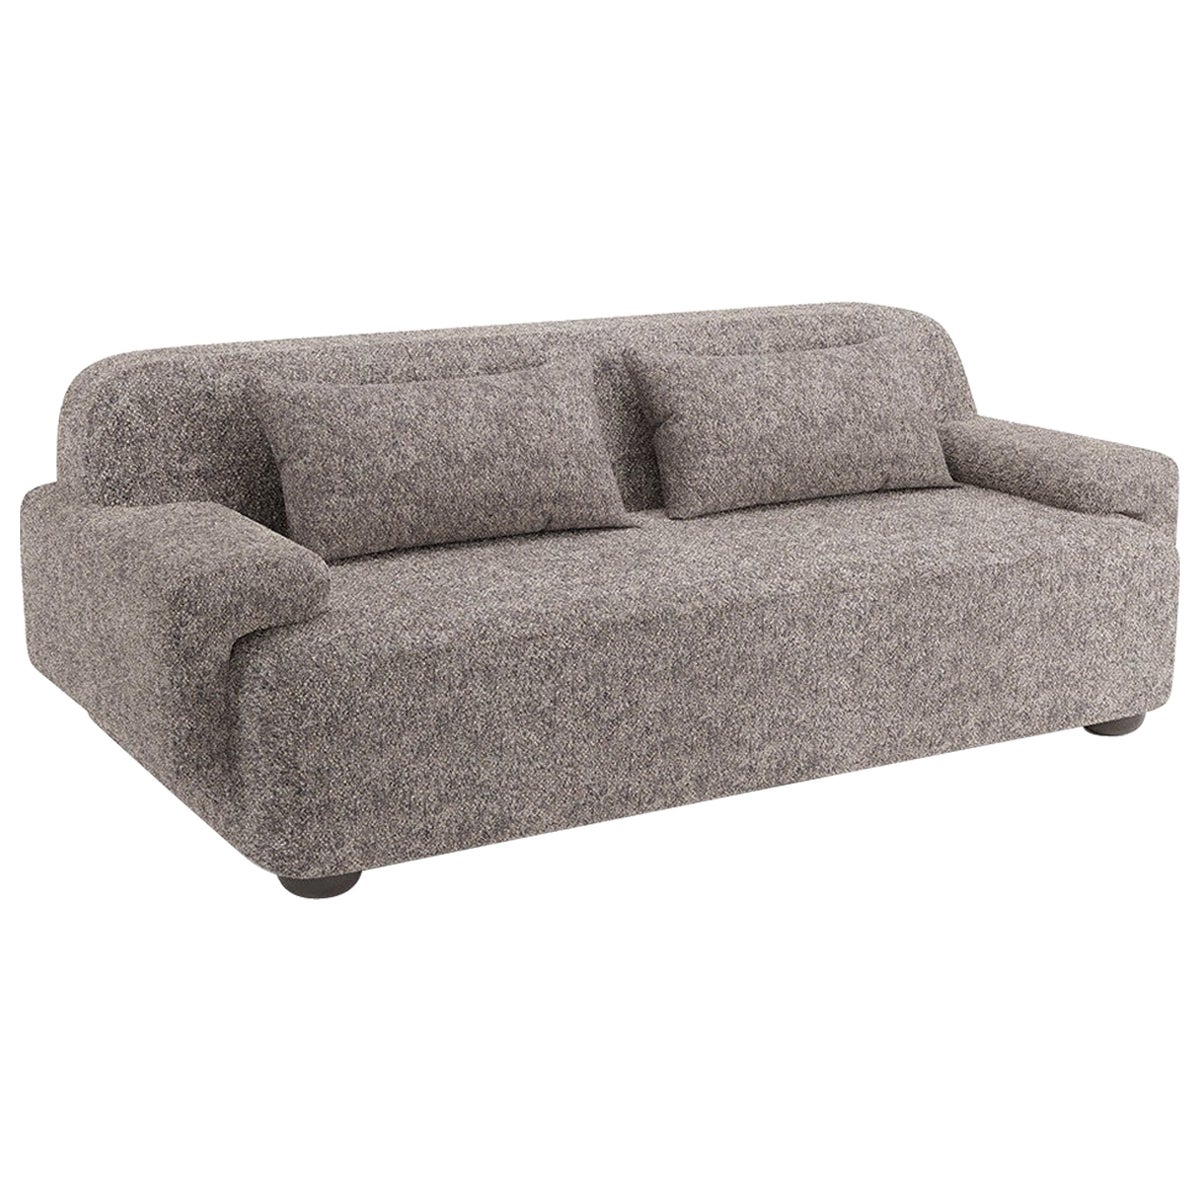 Popus Editions Lena 4 Seater Sofa in Anthracite Antwerp Linen Upholstery